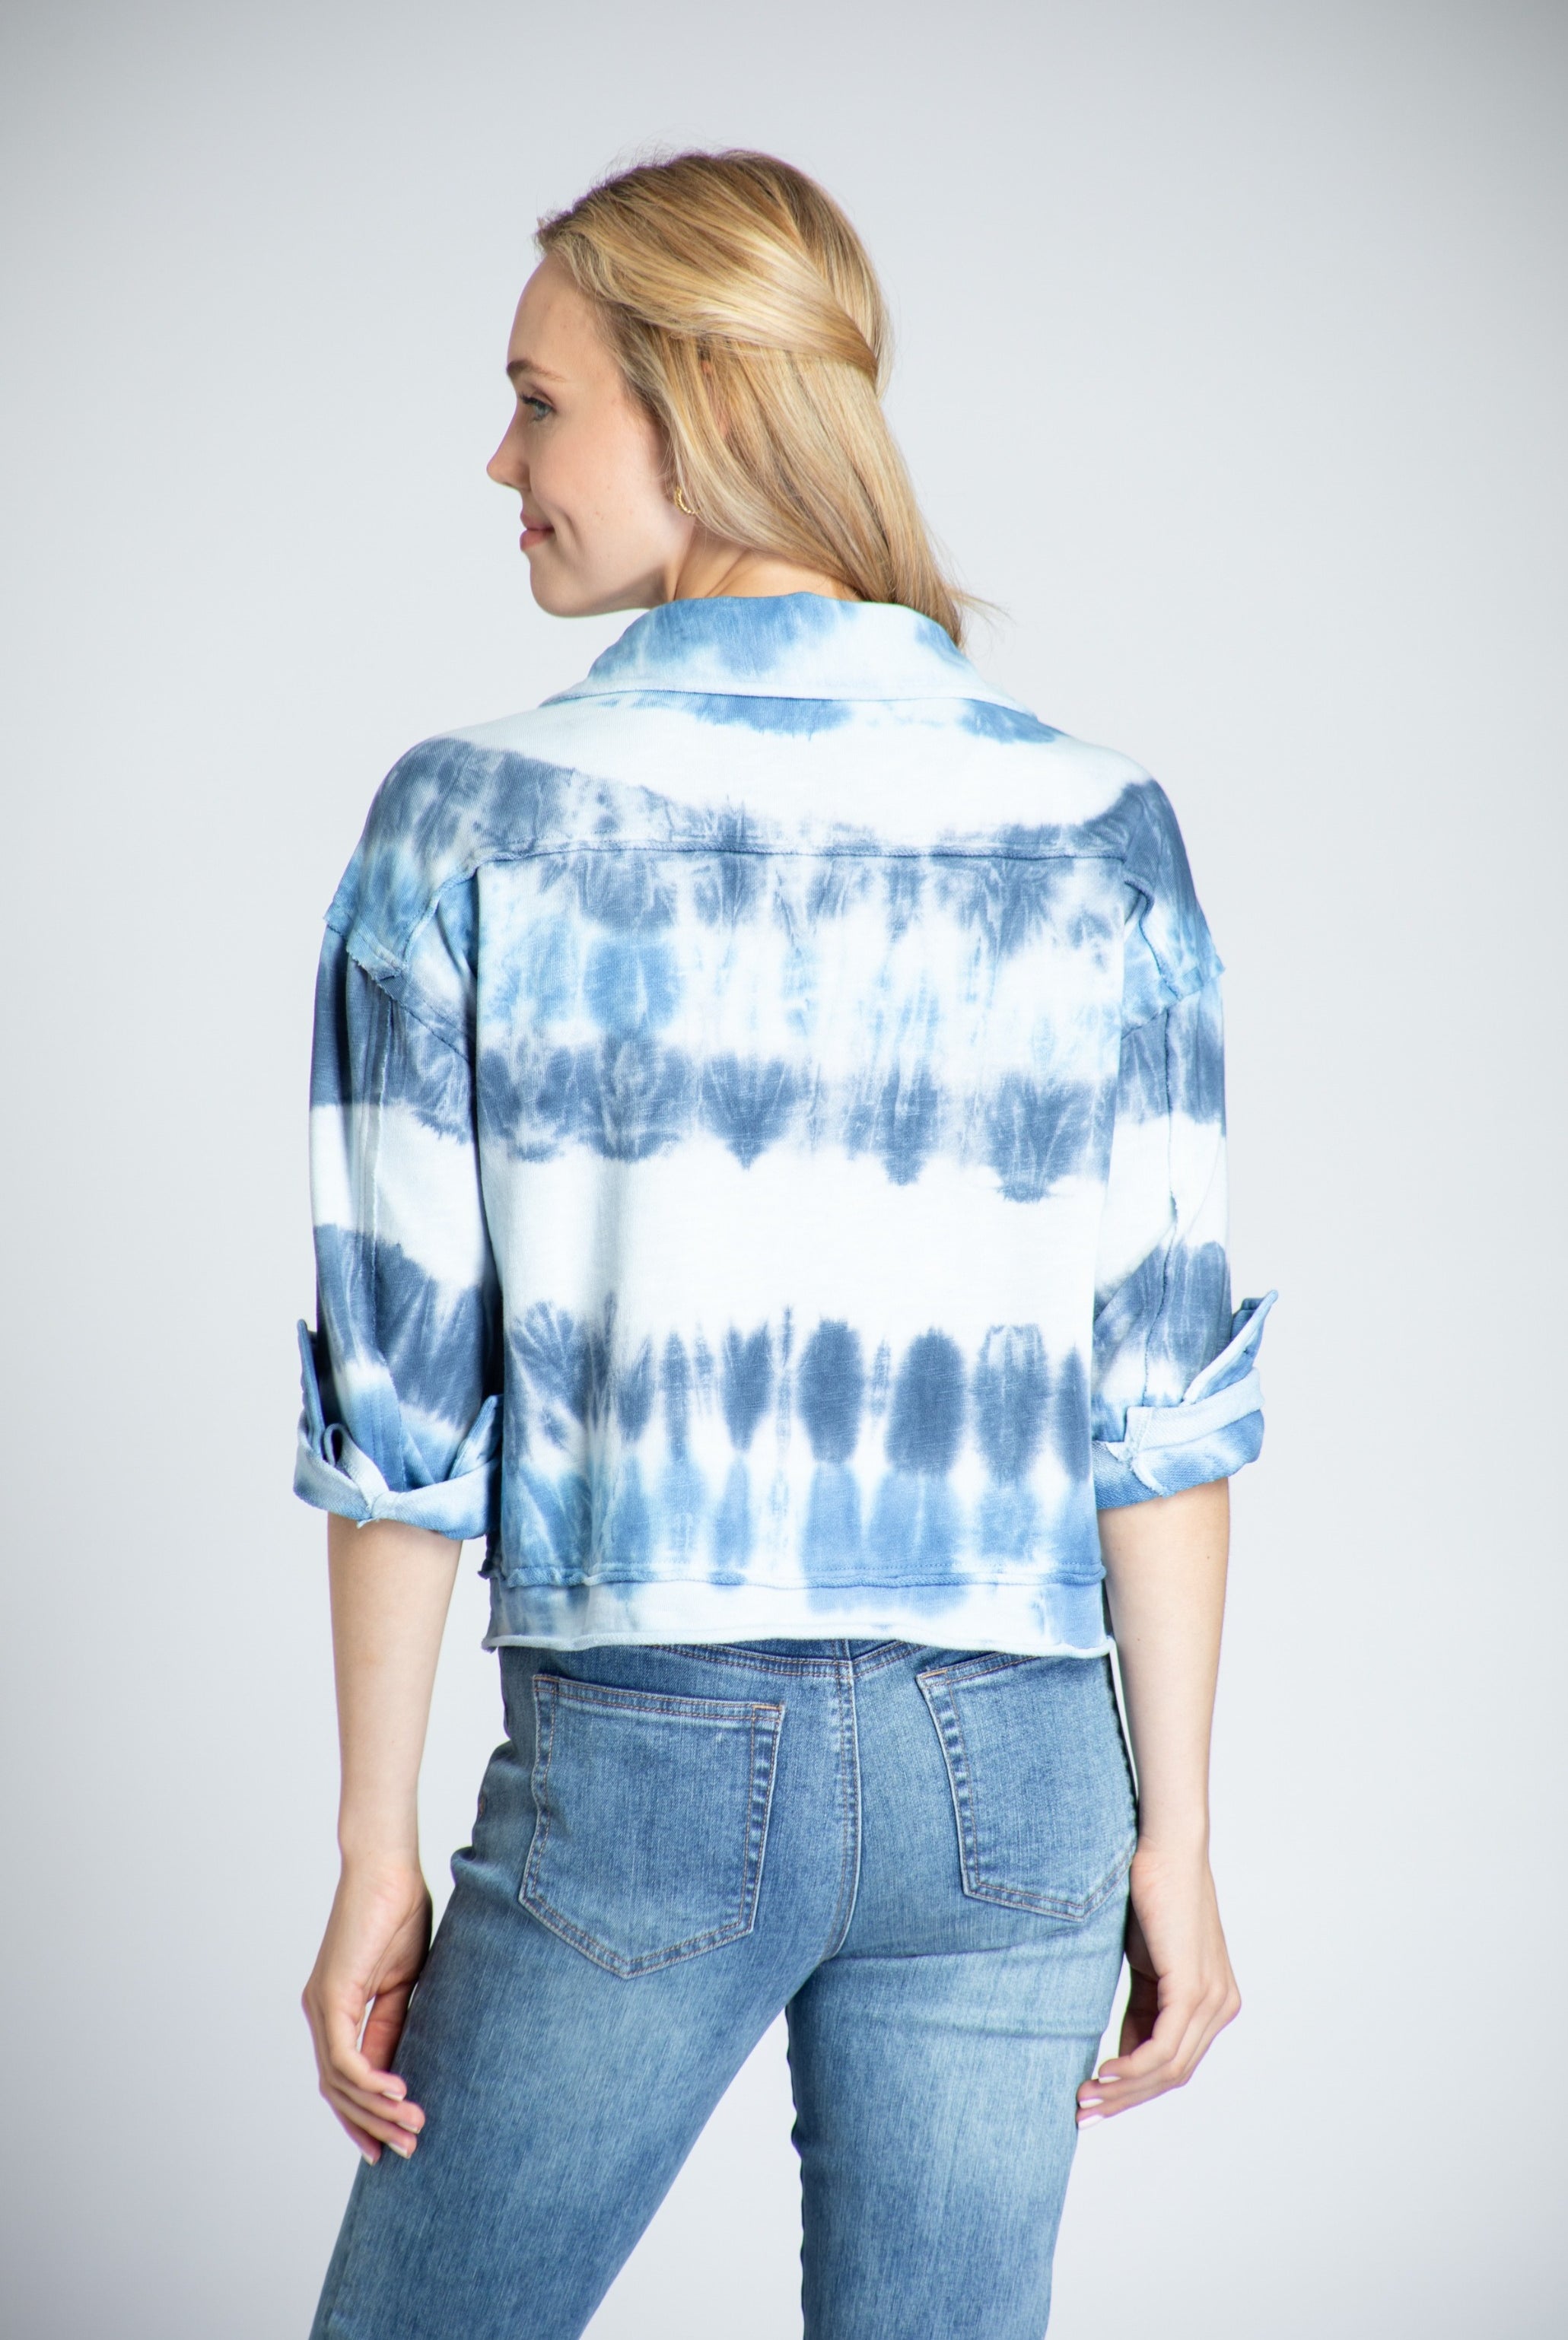 Raw Edge Jacket In Shades Of Blue